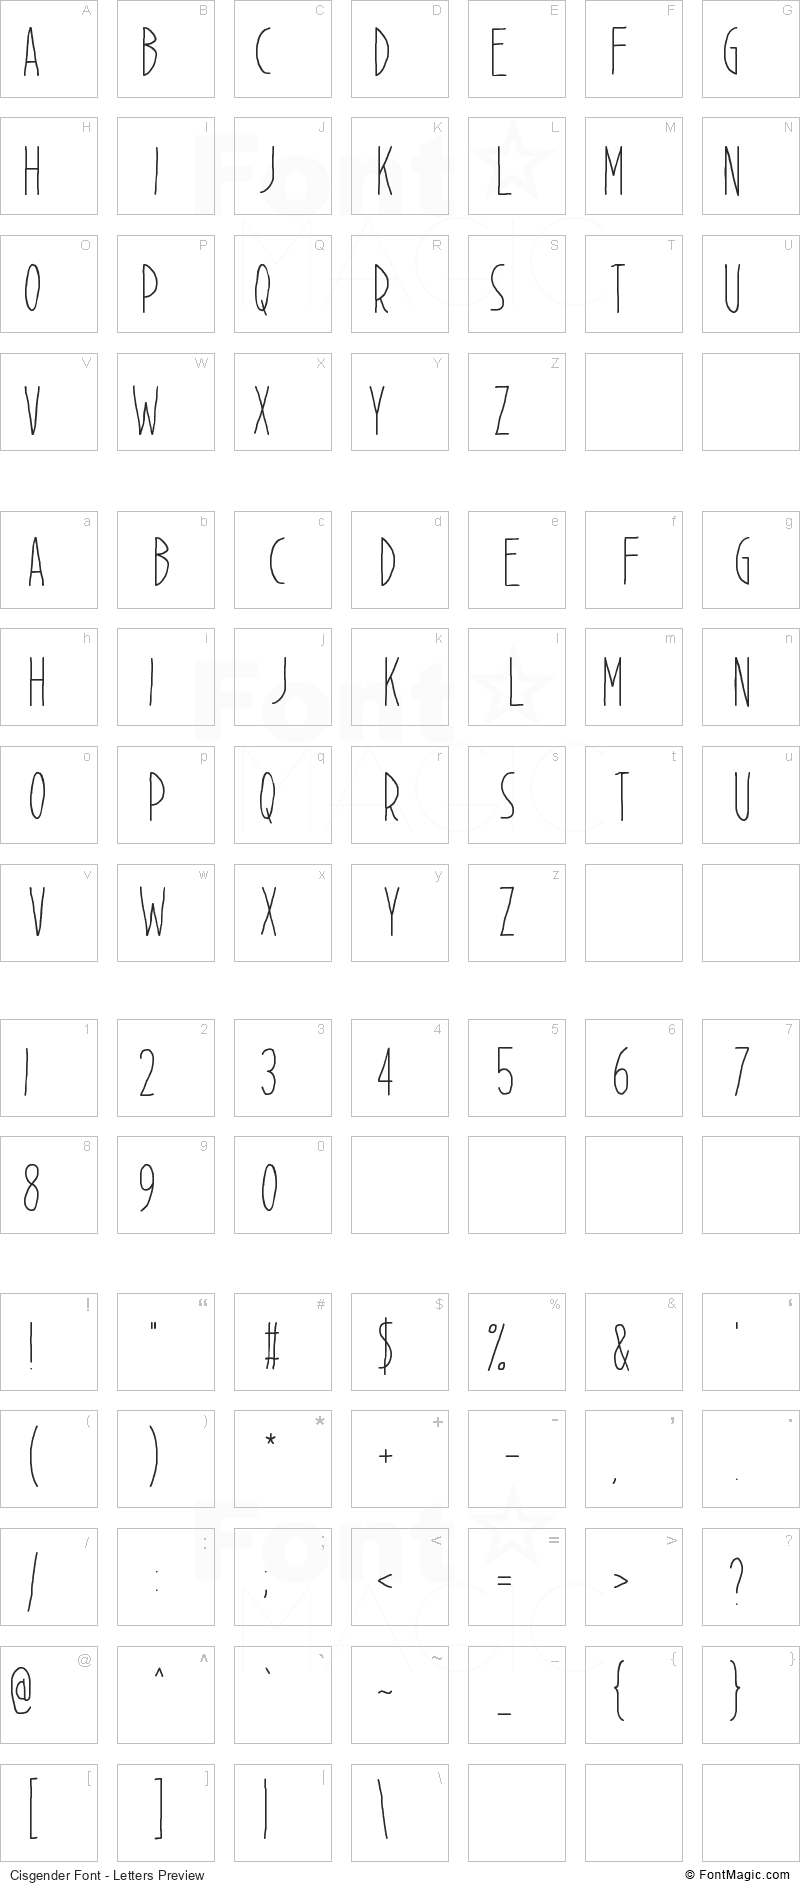 Cisgender Font - All Latters Preview Chart